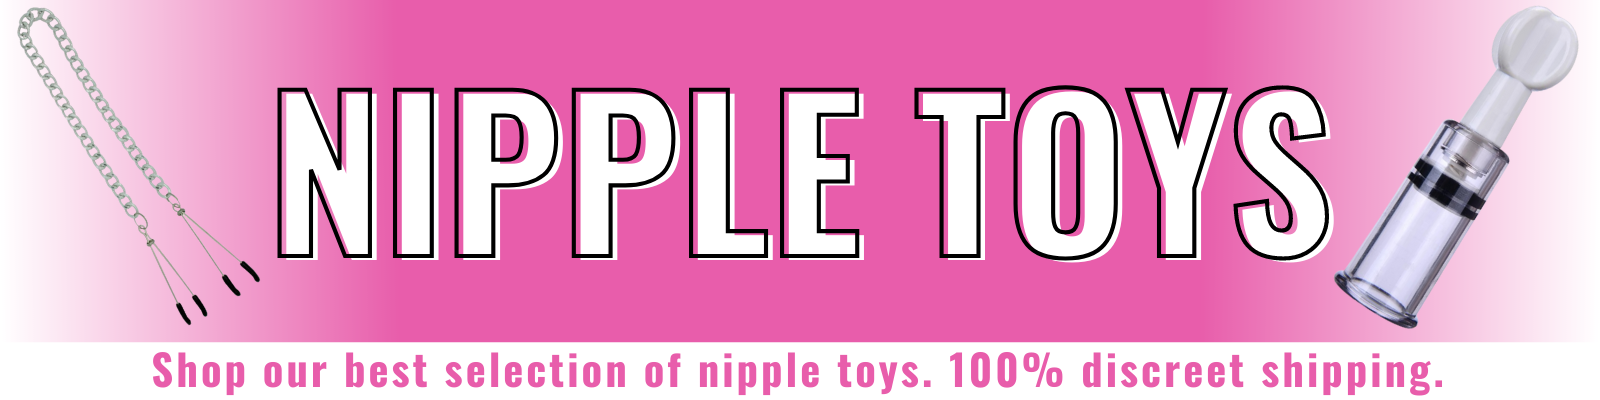 Banner for our collection of nipple toys. Banner reads: Nipple toys. Shop our best selection of nipple toys. 100% discreet shipping.